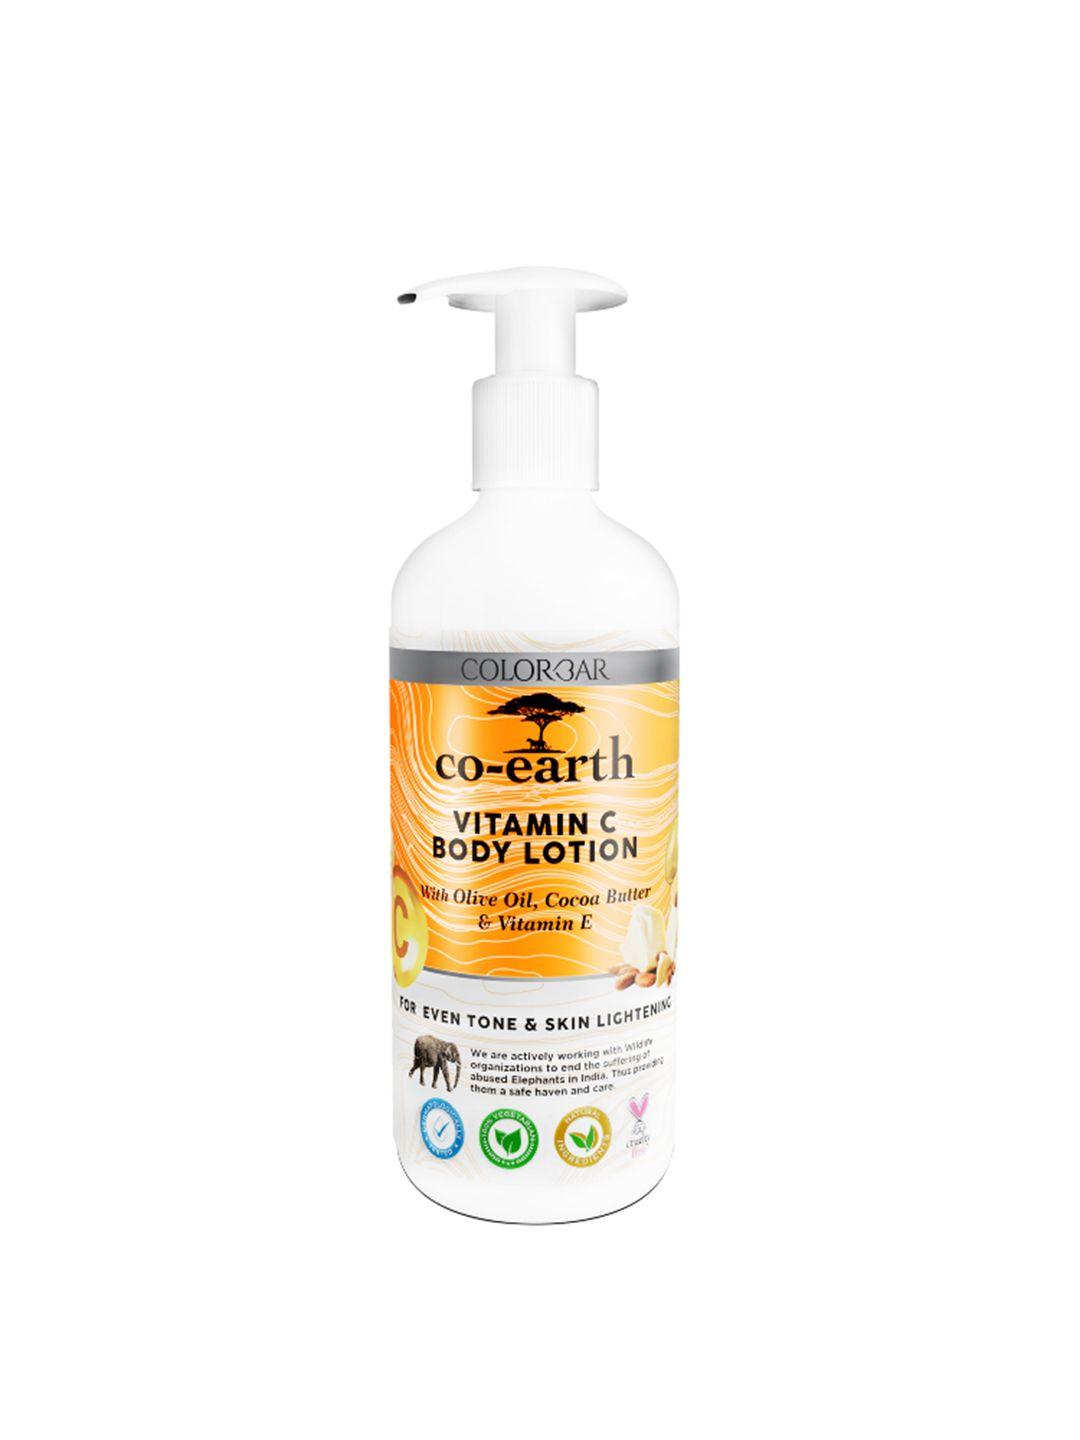 colorbar co-earth vitamin c body lotion with olive oil & cocoa butter - 300 ml